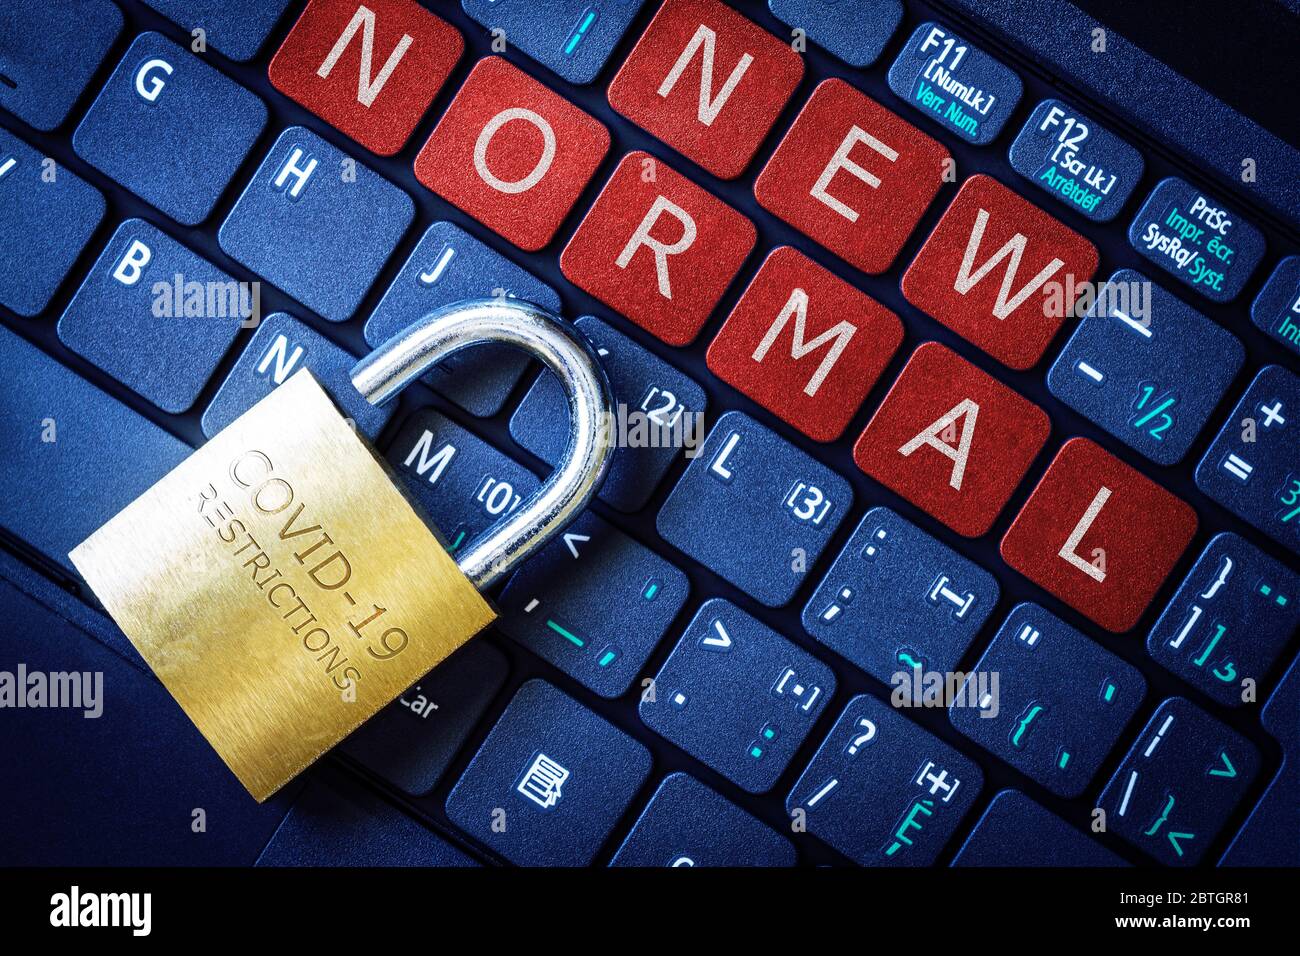 COVID-19 coronavirus lockdown restrictions ease concept illustrated by unlocked padlock with New Normal on laptop red alert keyboard buttons. Stock Photo